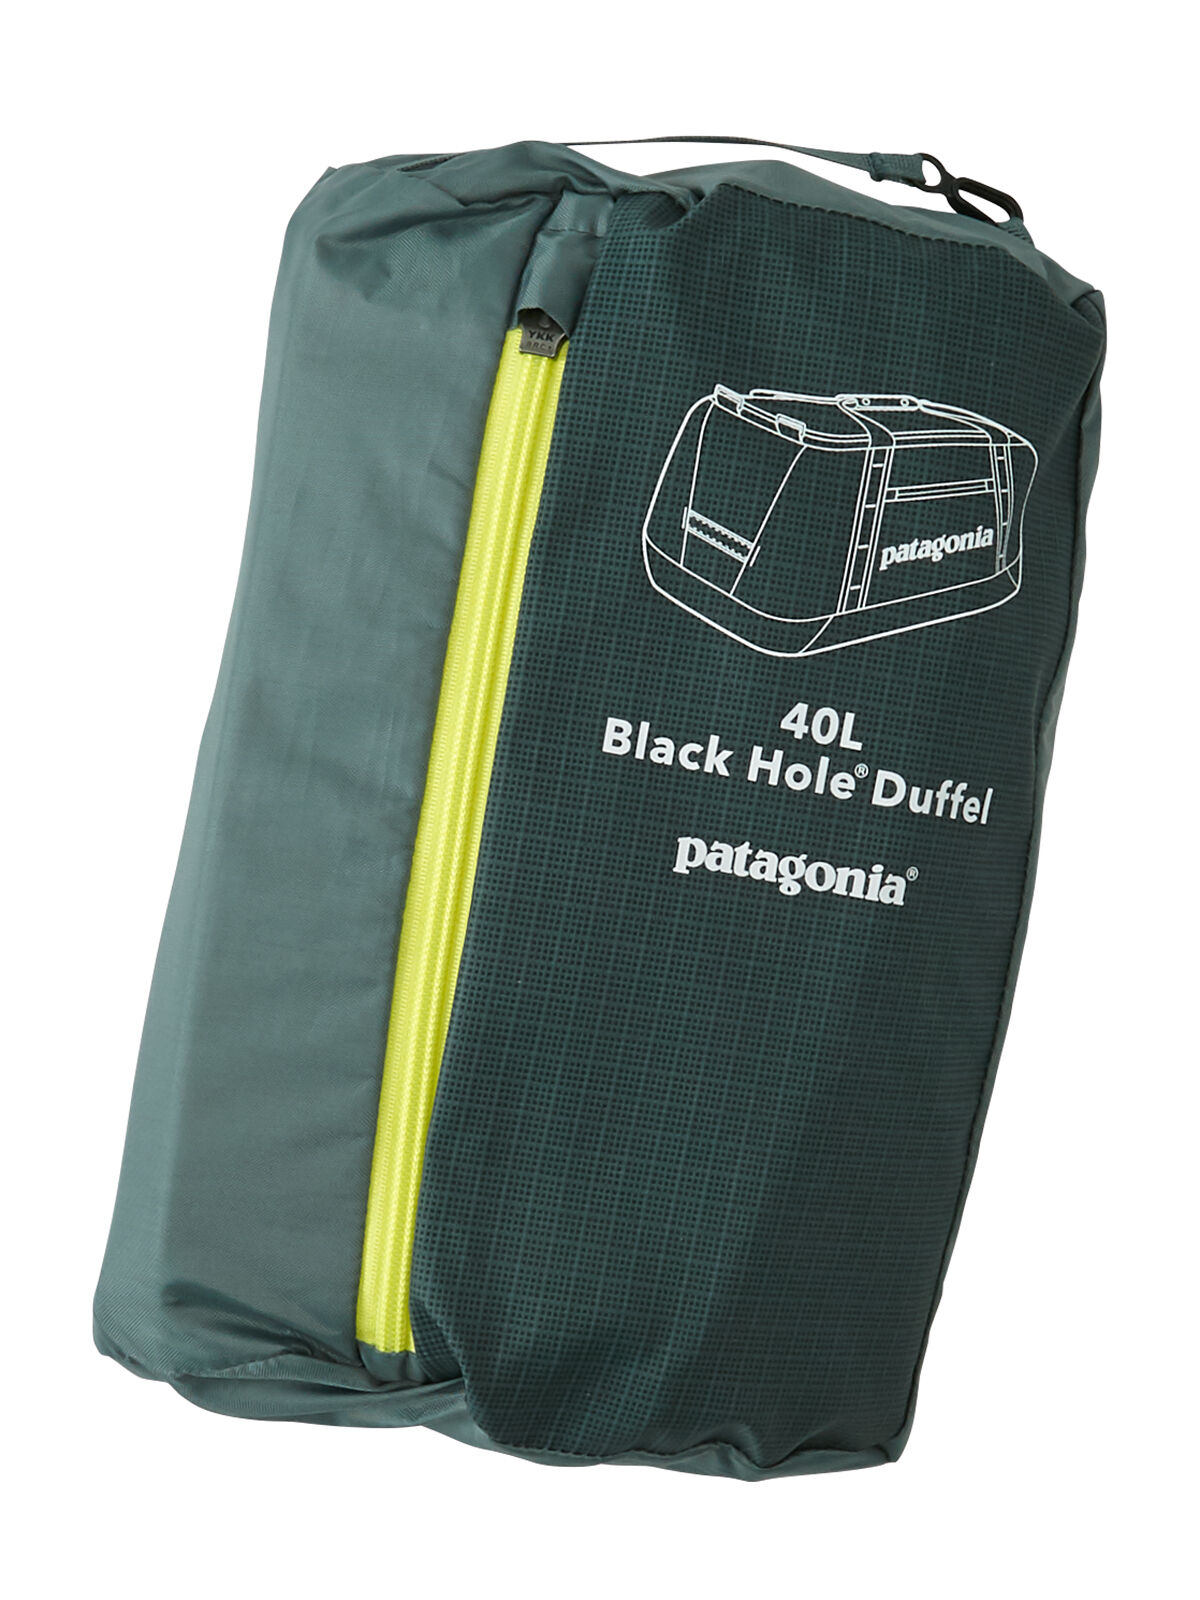 Patagonia Black Hole Duffel Review: The Only Duffel You'll Need